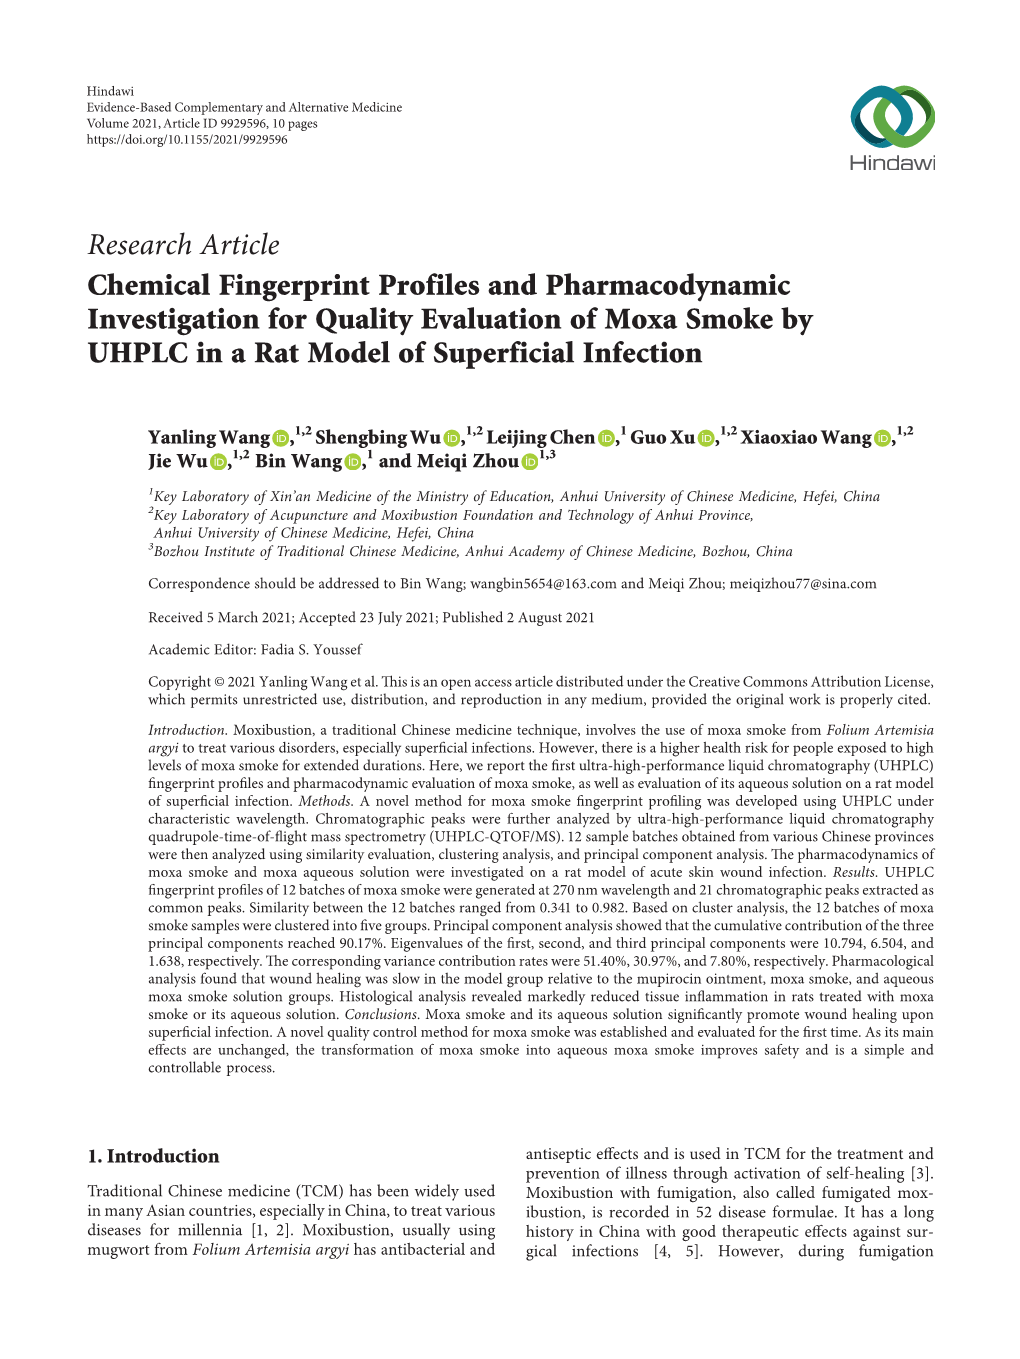 Chemical Fingerprint Profiles and Pharmacodynamic Investigation for Quality Evaluation of Moxa Smoke by UHPLC in a Rat Model of Superficial Infection